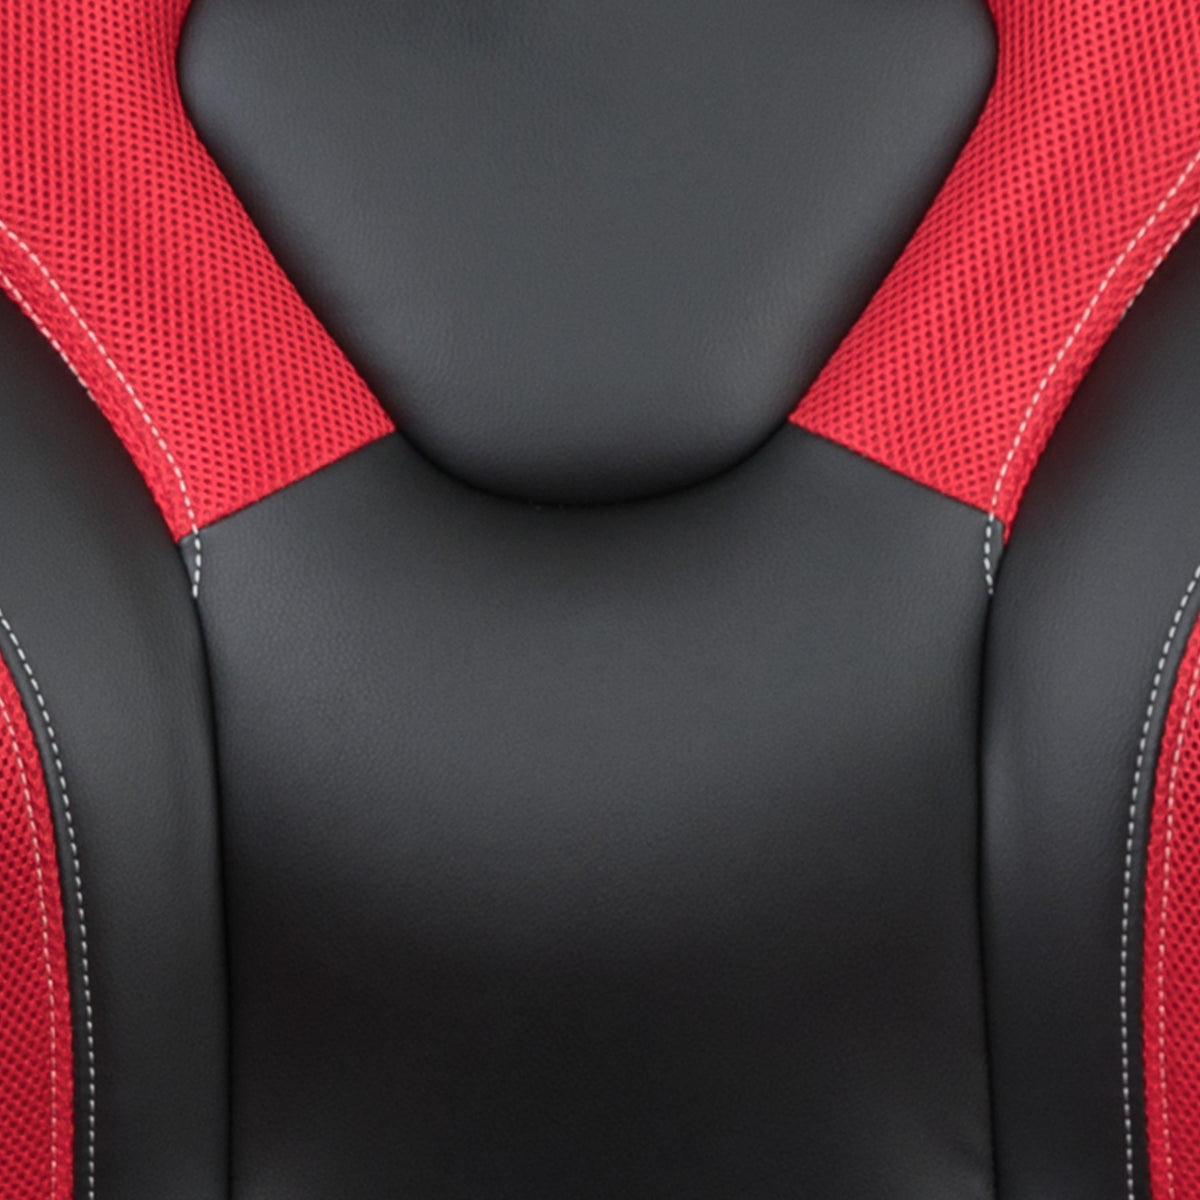 Red |#| Ergonomic Red and Black Computer Gaming Chair with Padded Flip-Up Arms